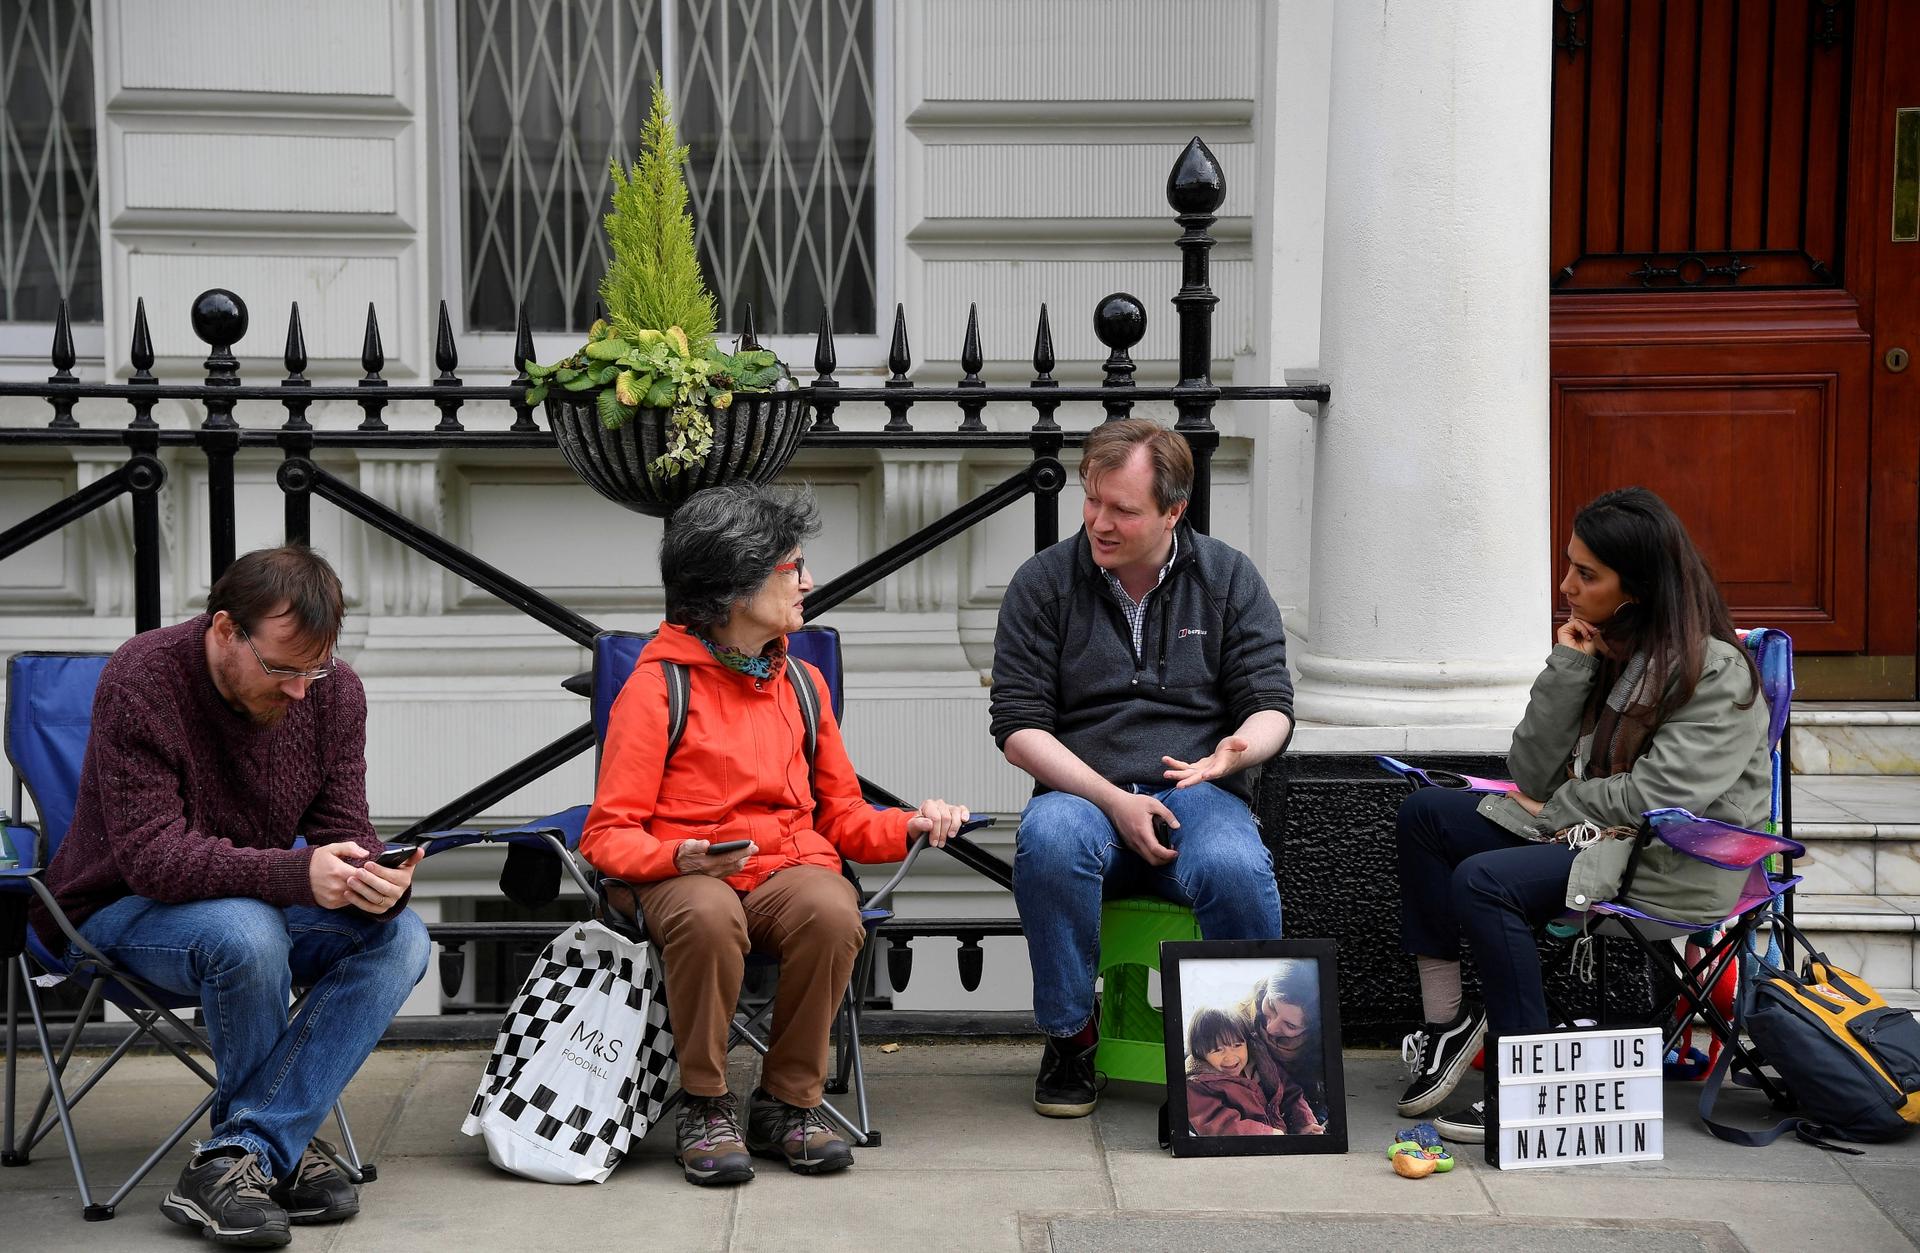 Richard Ratcliffe, the husband of jailed British-Iranian aid worker Nazanin Zaghari-Ratcliffe speaks with supporters as he stages a vigil and goes on hunger strike outside of the Iranian embassy in London, Britain, June 15, 2019. 